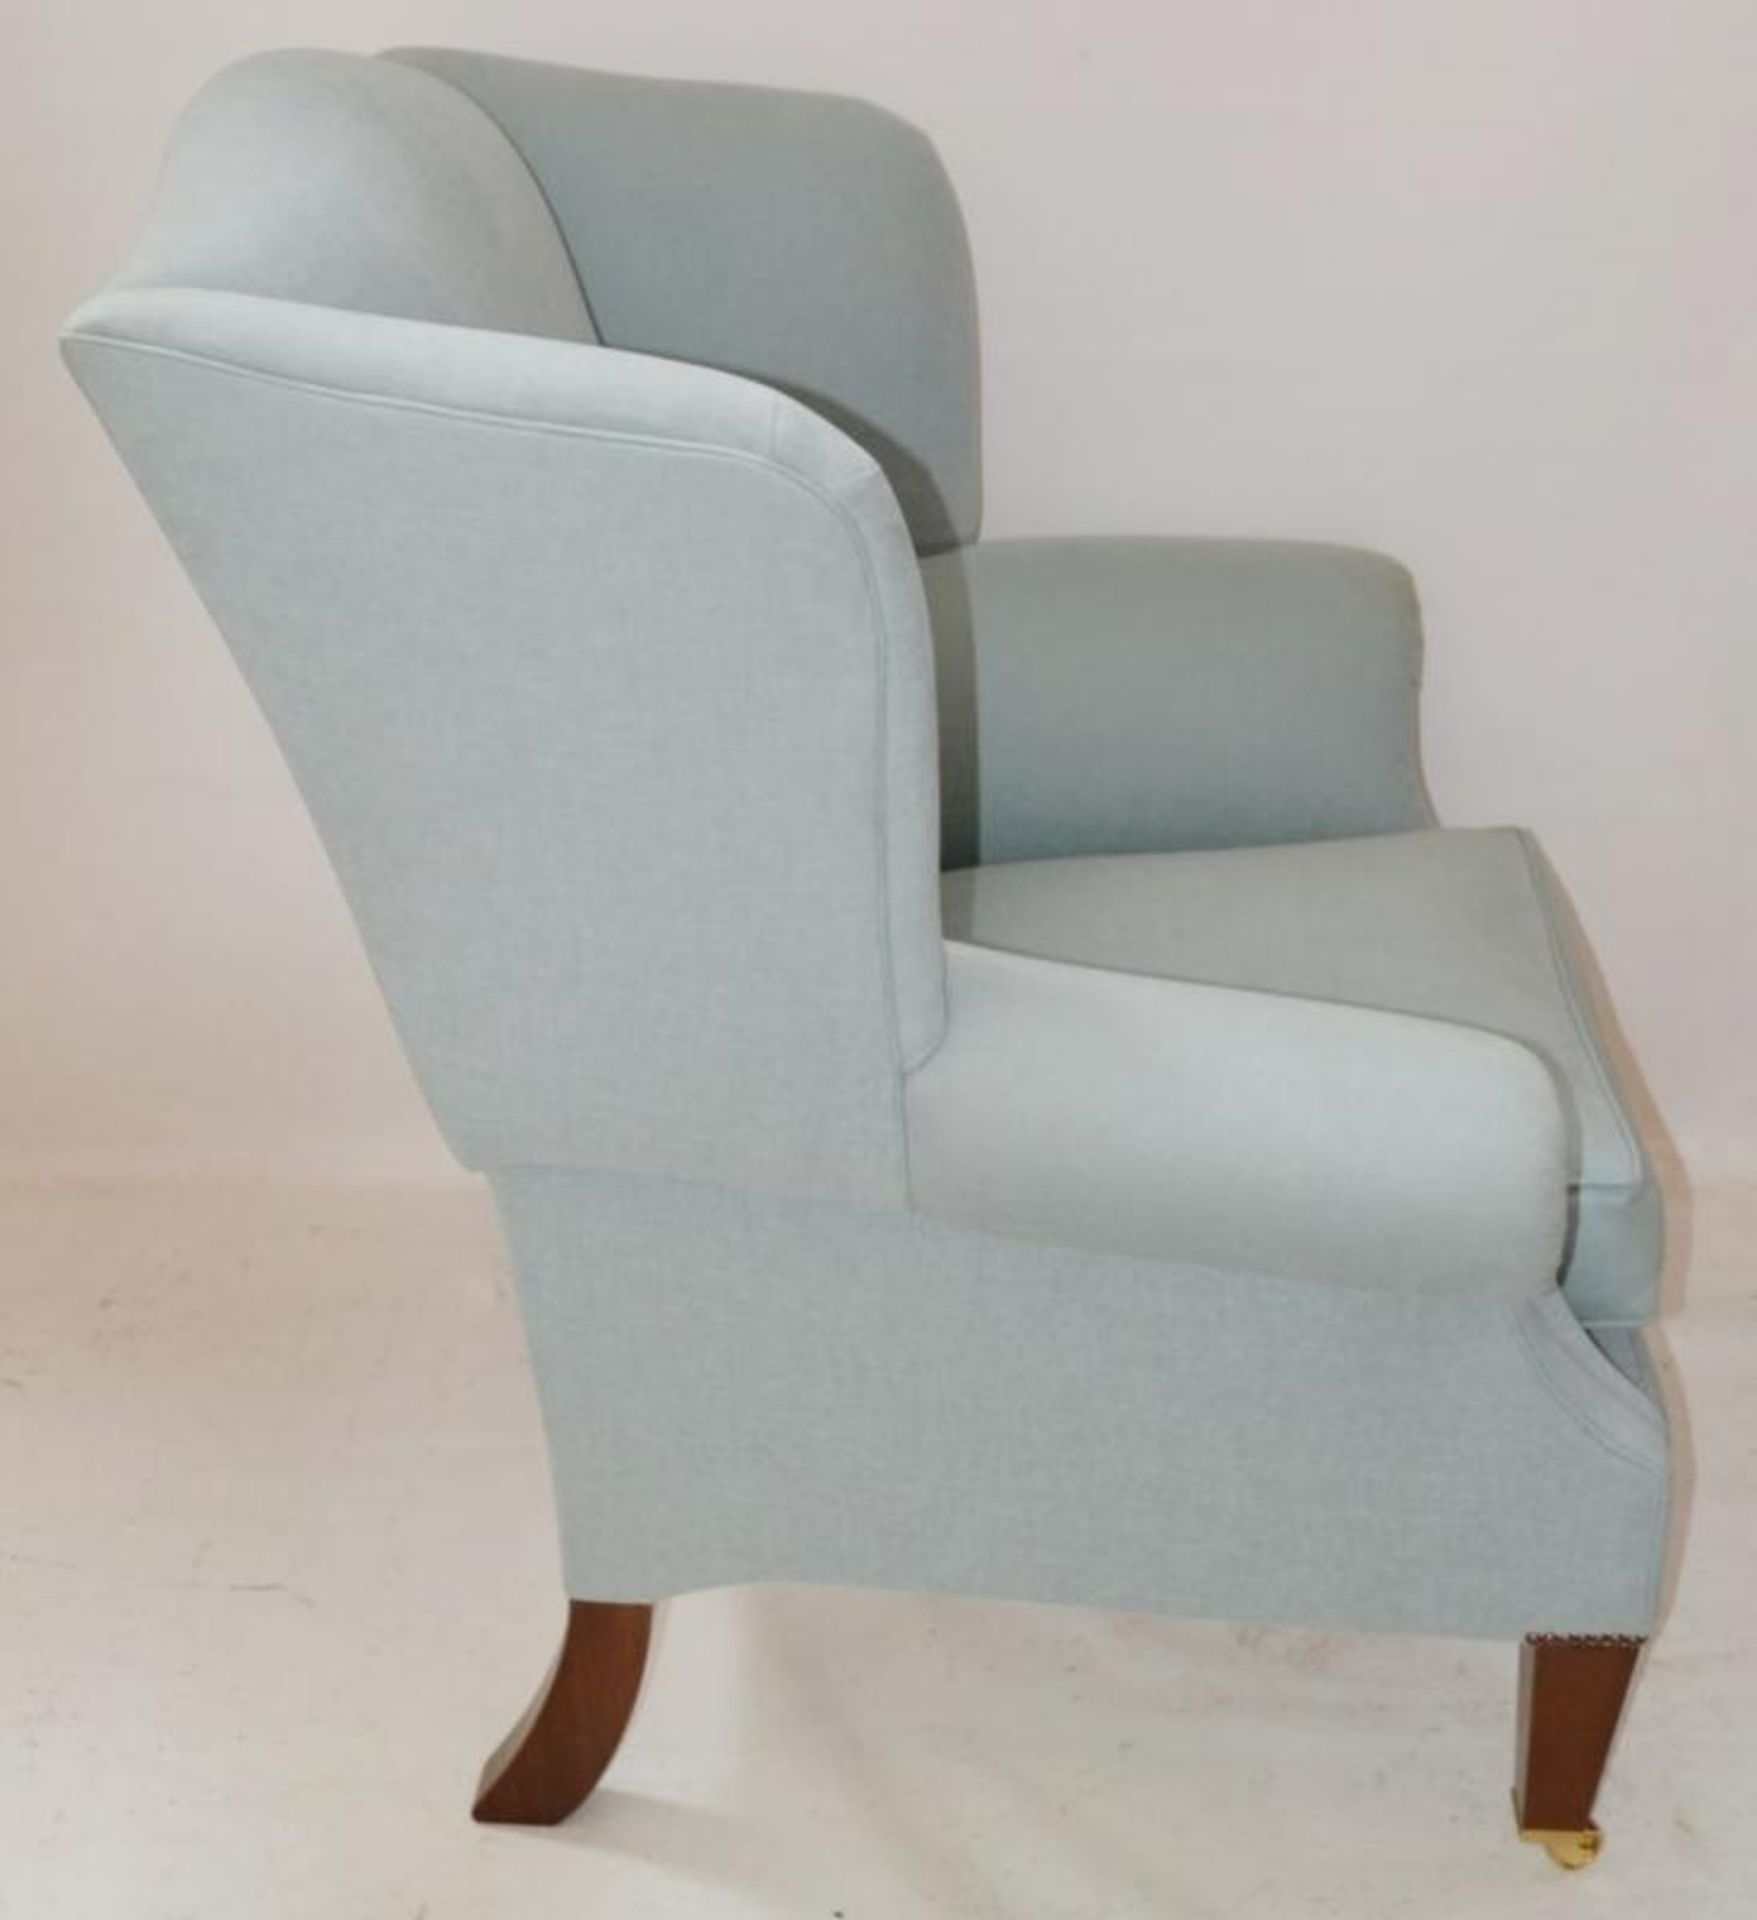 1 x Duresta "Somerset" Wing Chair Light Blue - Dimensions: 113H x 91W x 92D cms - Ref: 3143184-A NP1 - Image 6 of 7